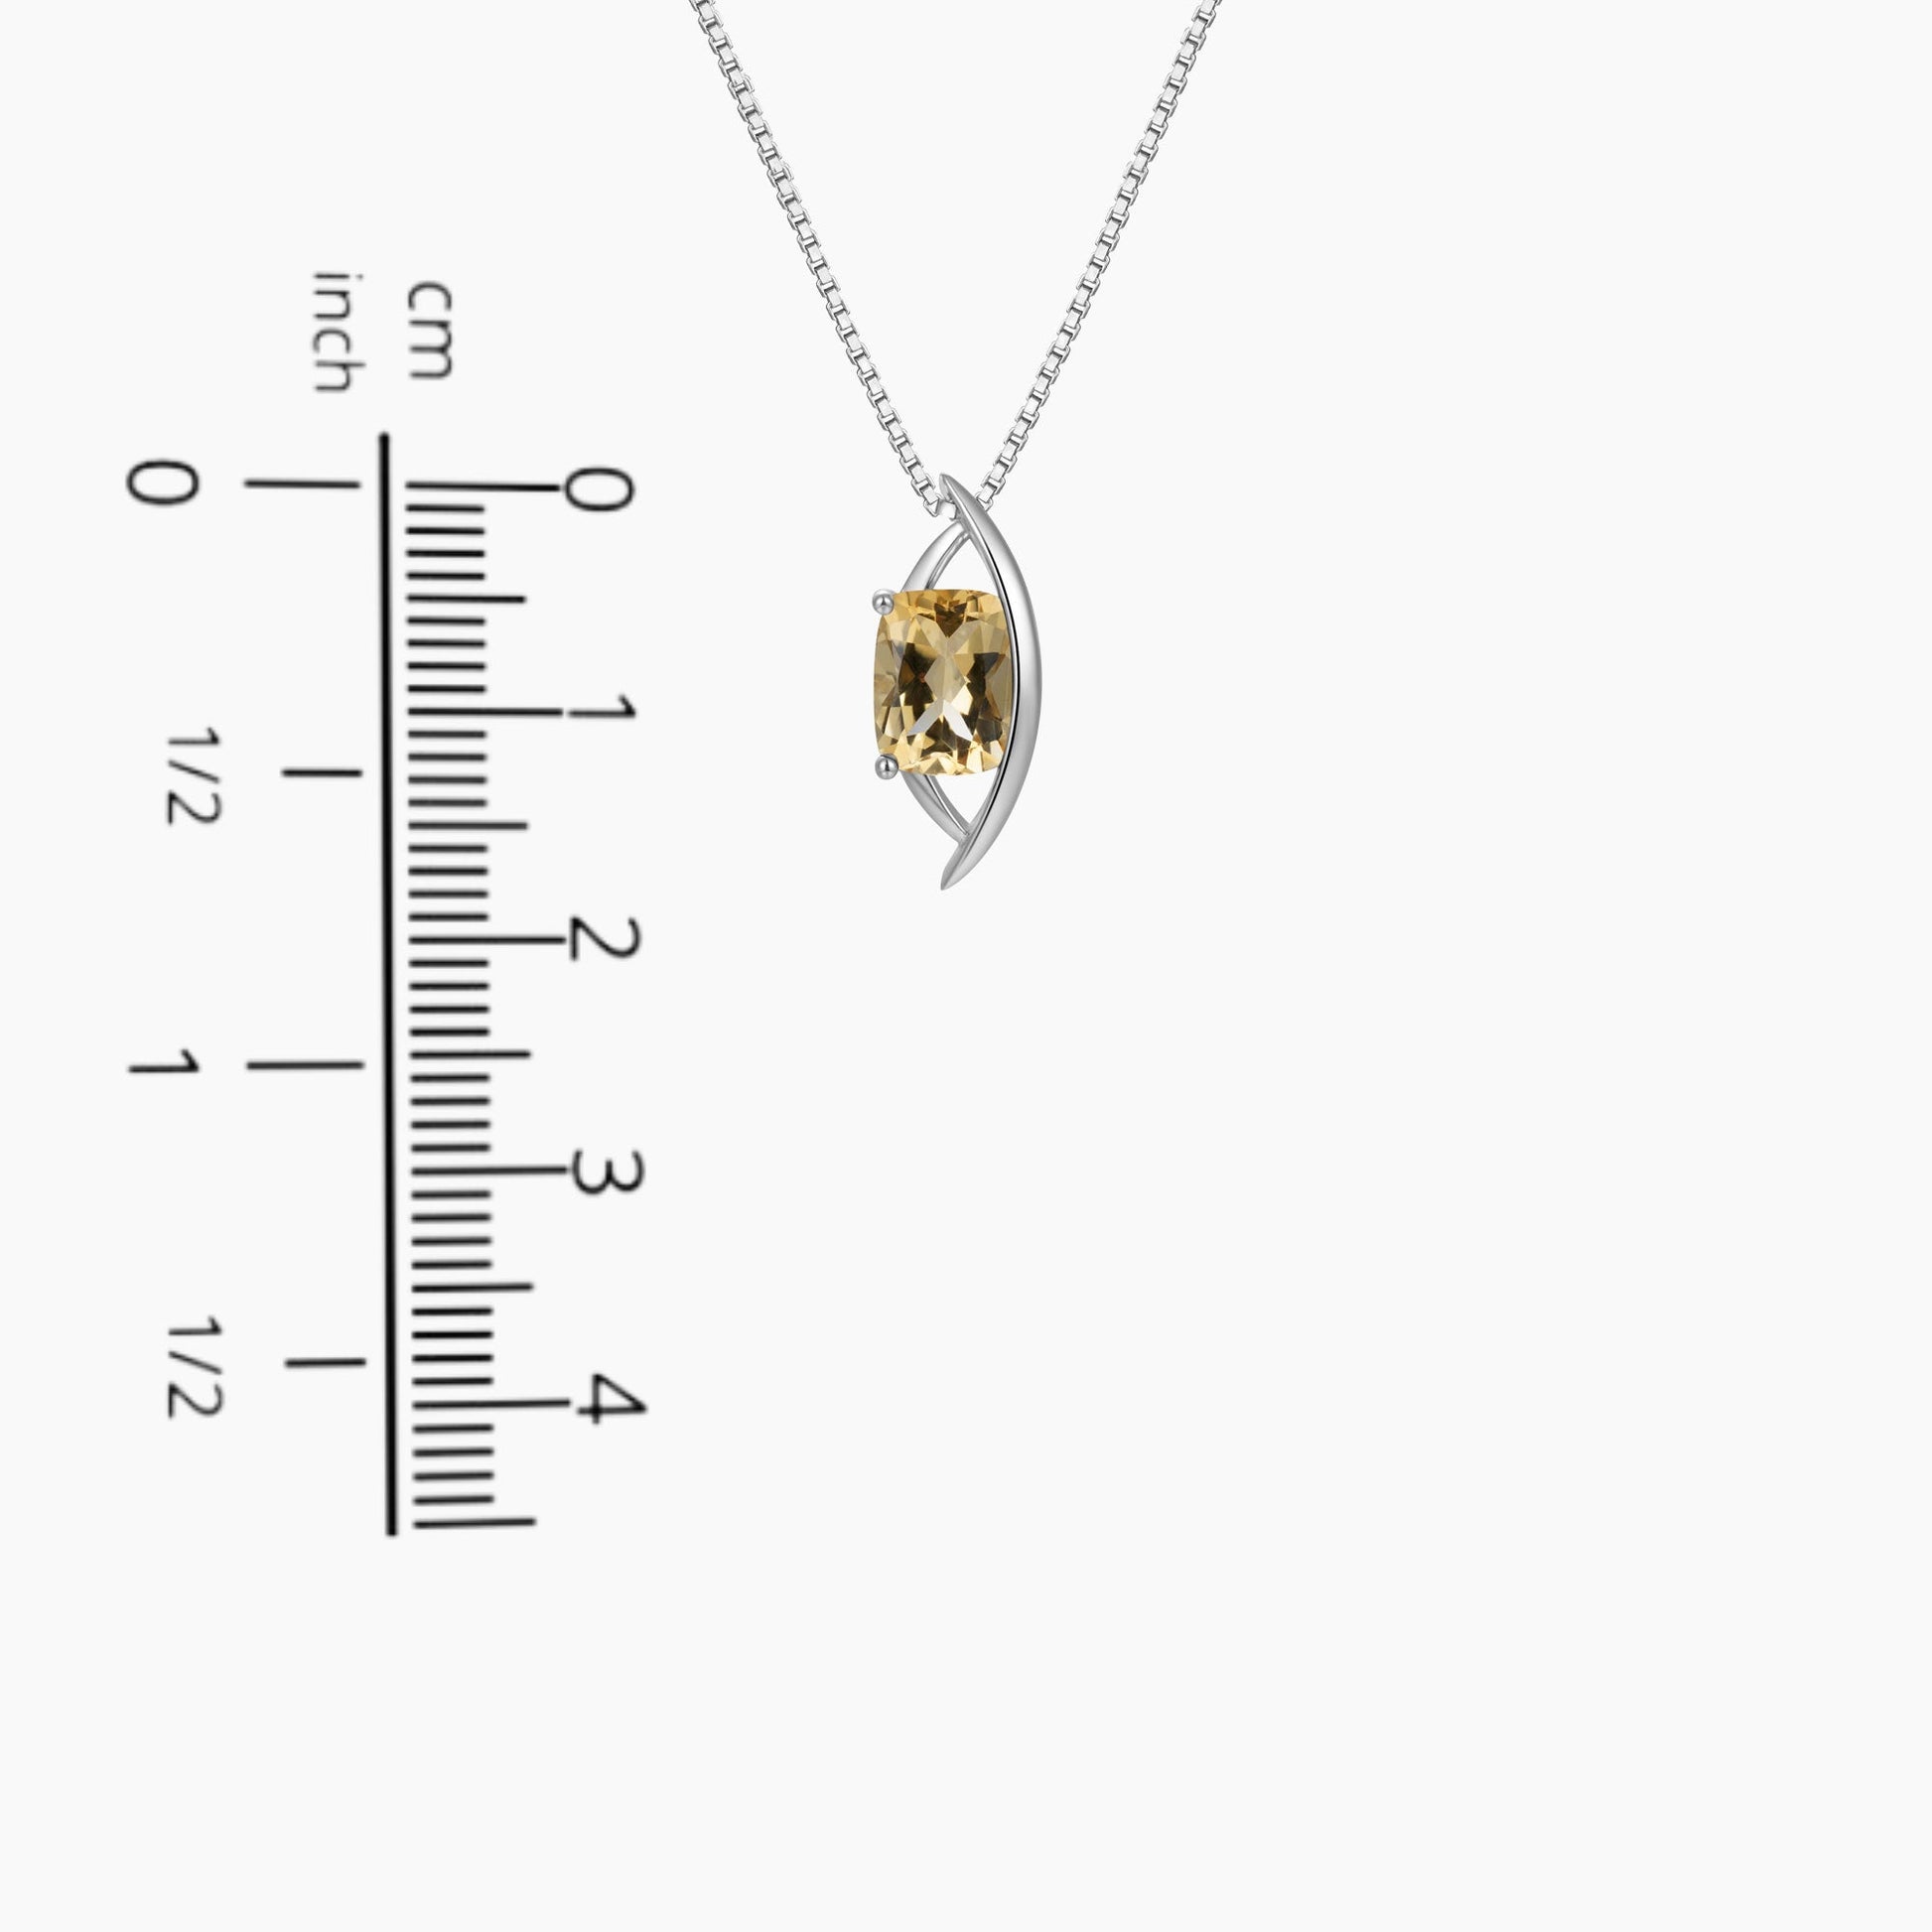 Citrine Cushion Cut Globe Necklace - Image displaying necklace with scale, providing size reference for accurate measurement.